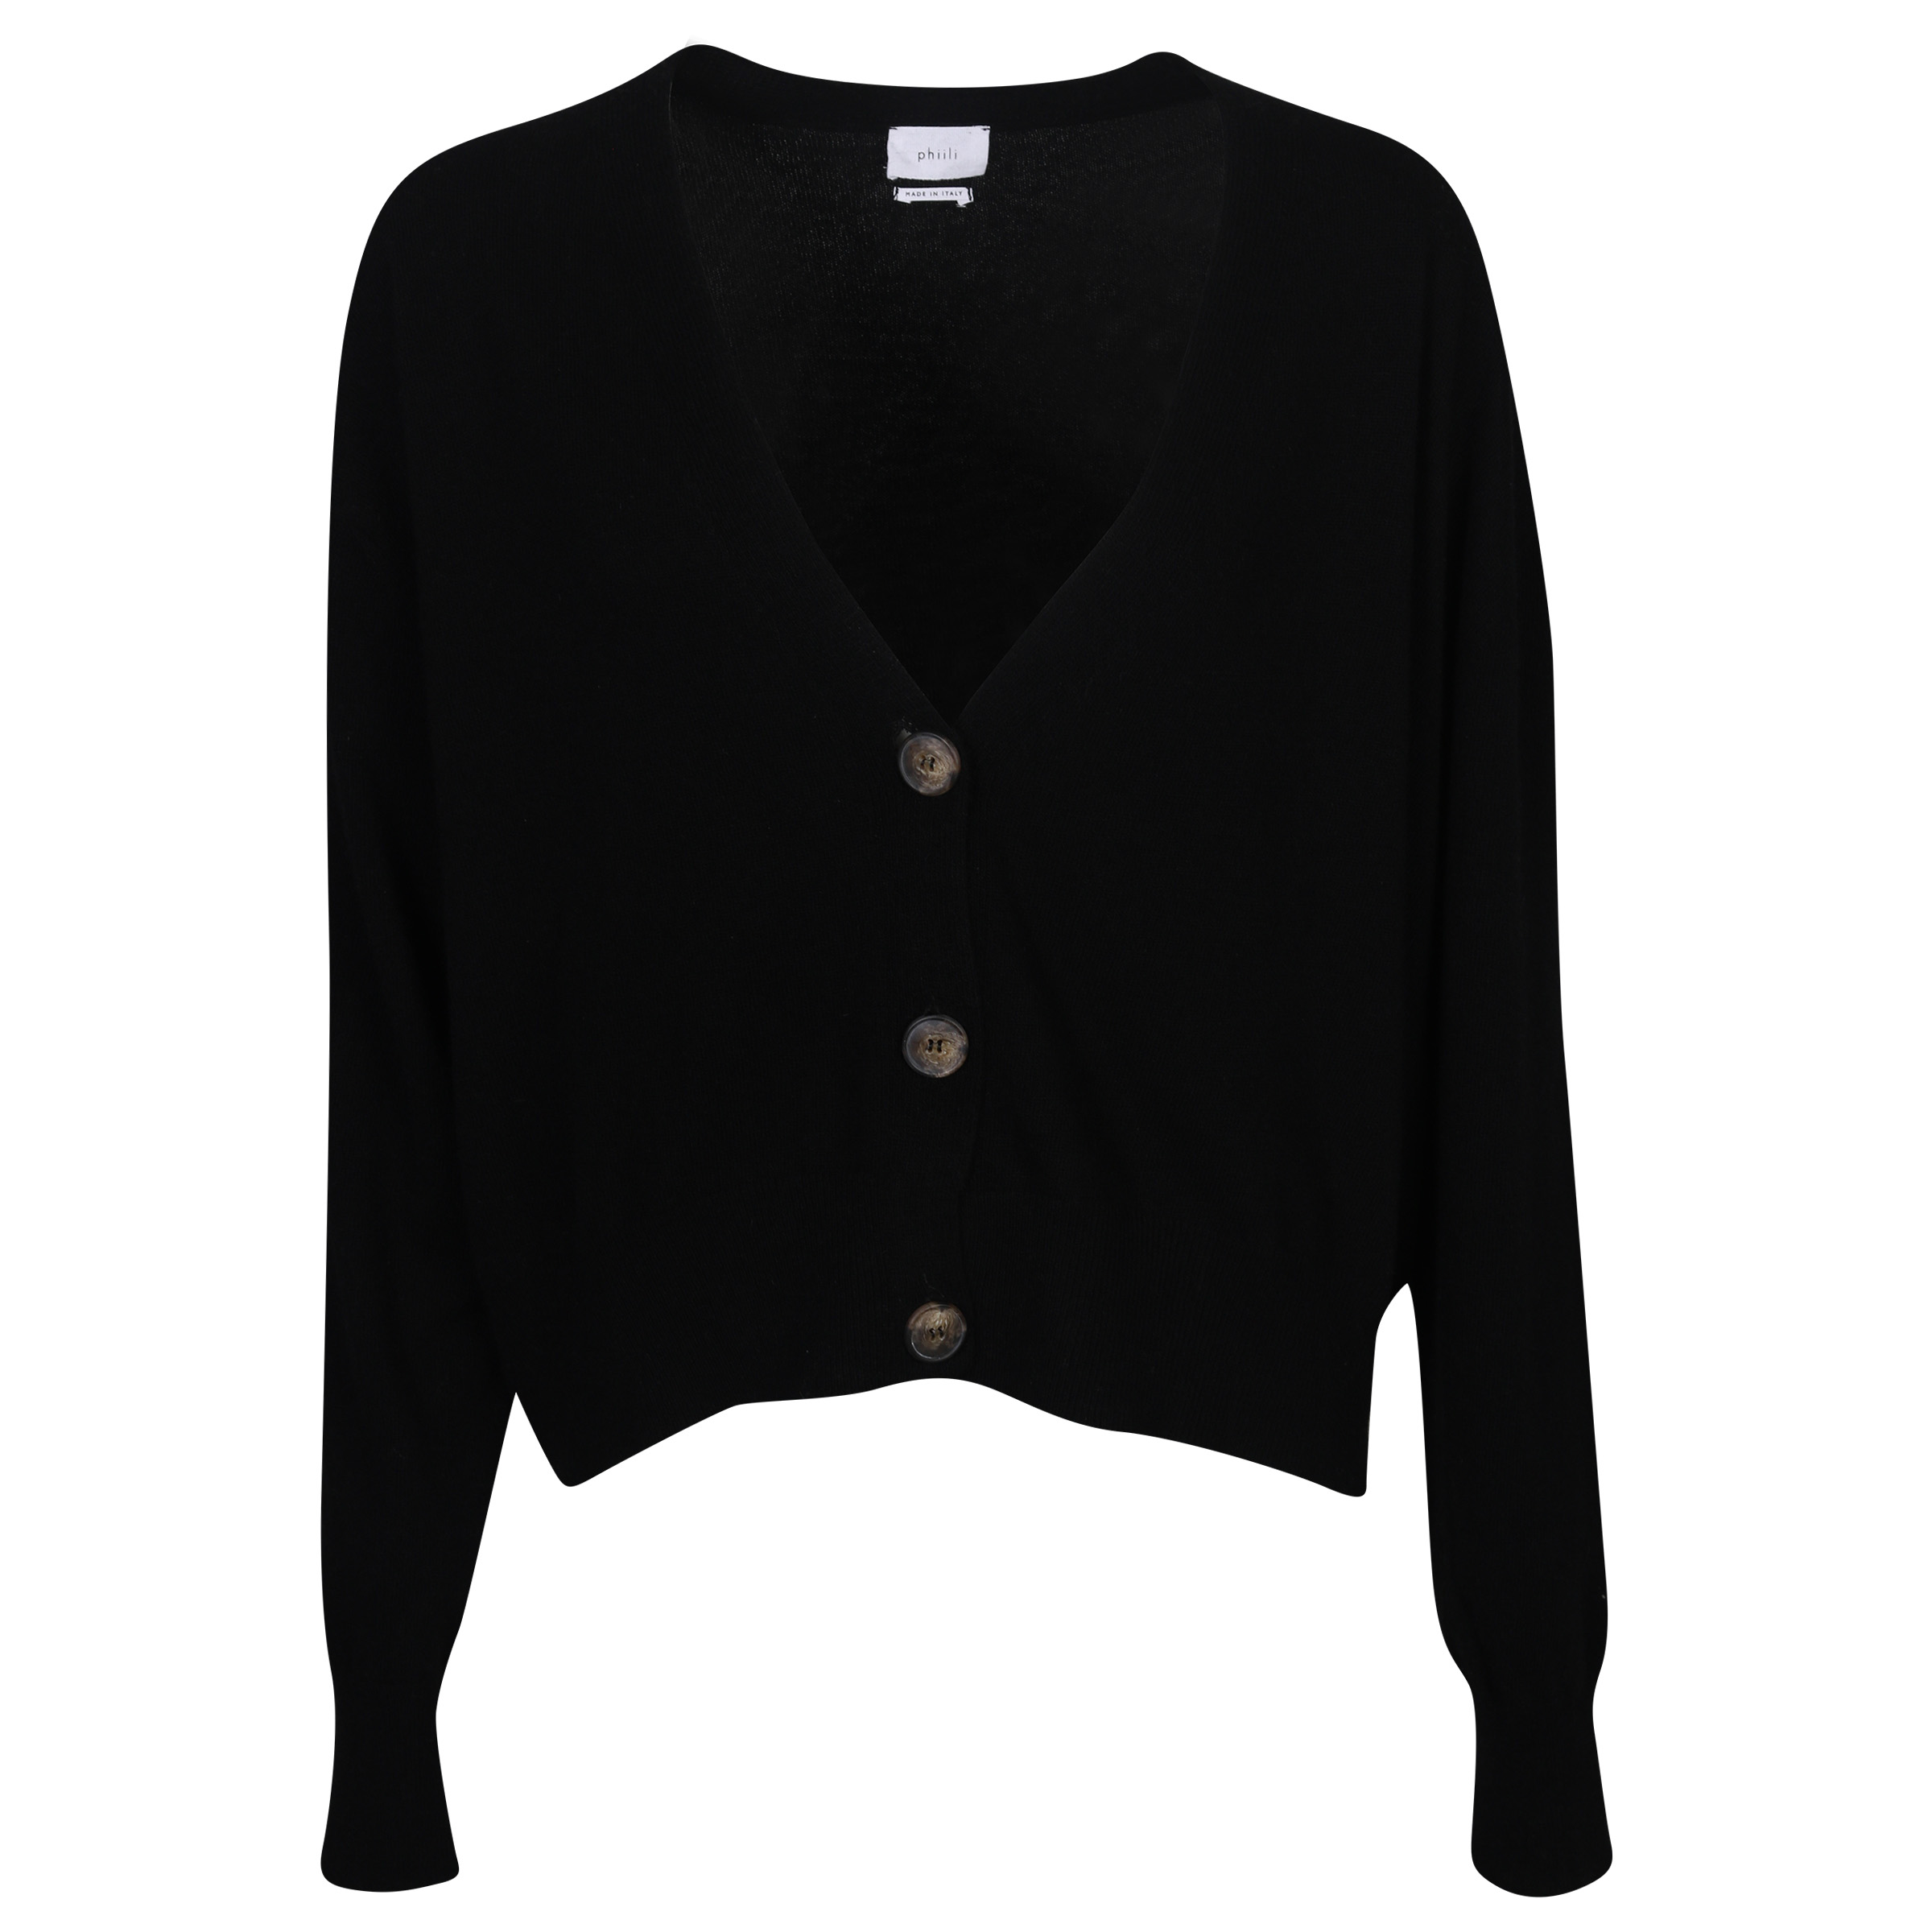 Phiili Recycled Cashmere Cardigan in Black XS/S